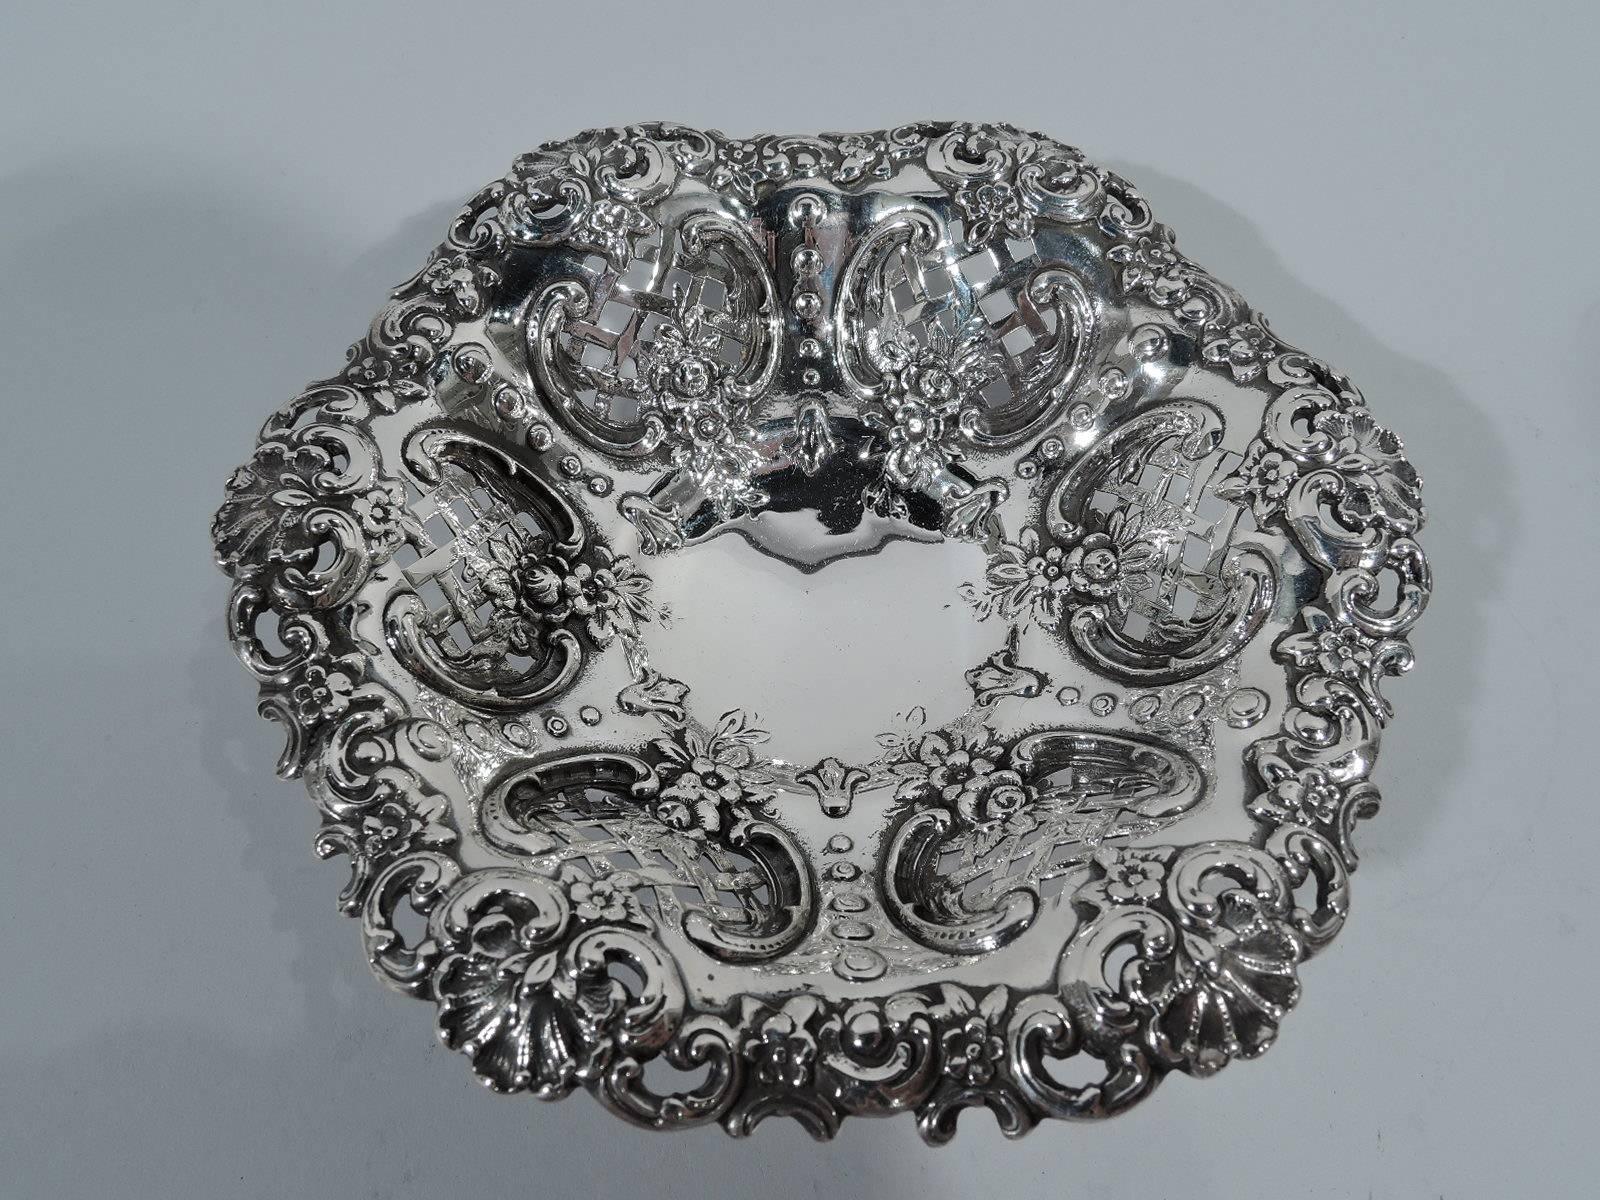 Small and sumptuous sterling silver bowl. Made by Tiffany & Co. in New York. Circular plain well, tapering and lobed sides, and wavy rim. Sides interior have scrolled frames with pierced diaper pattern and flowers. Rim has c-scrolls, scallop shells,